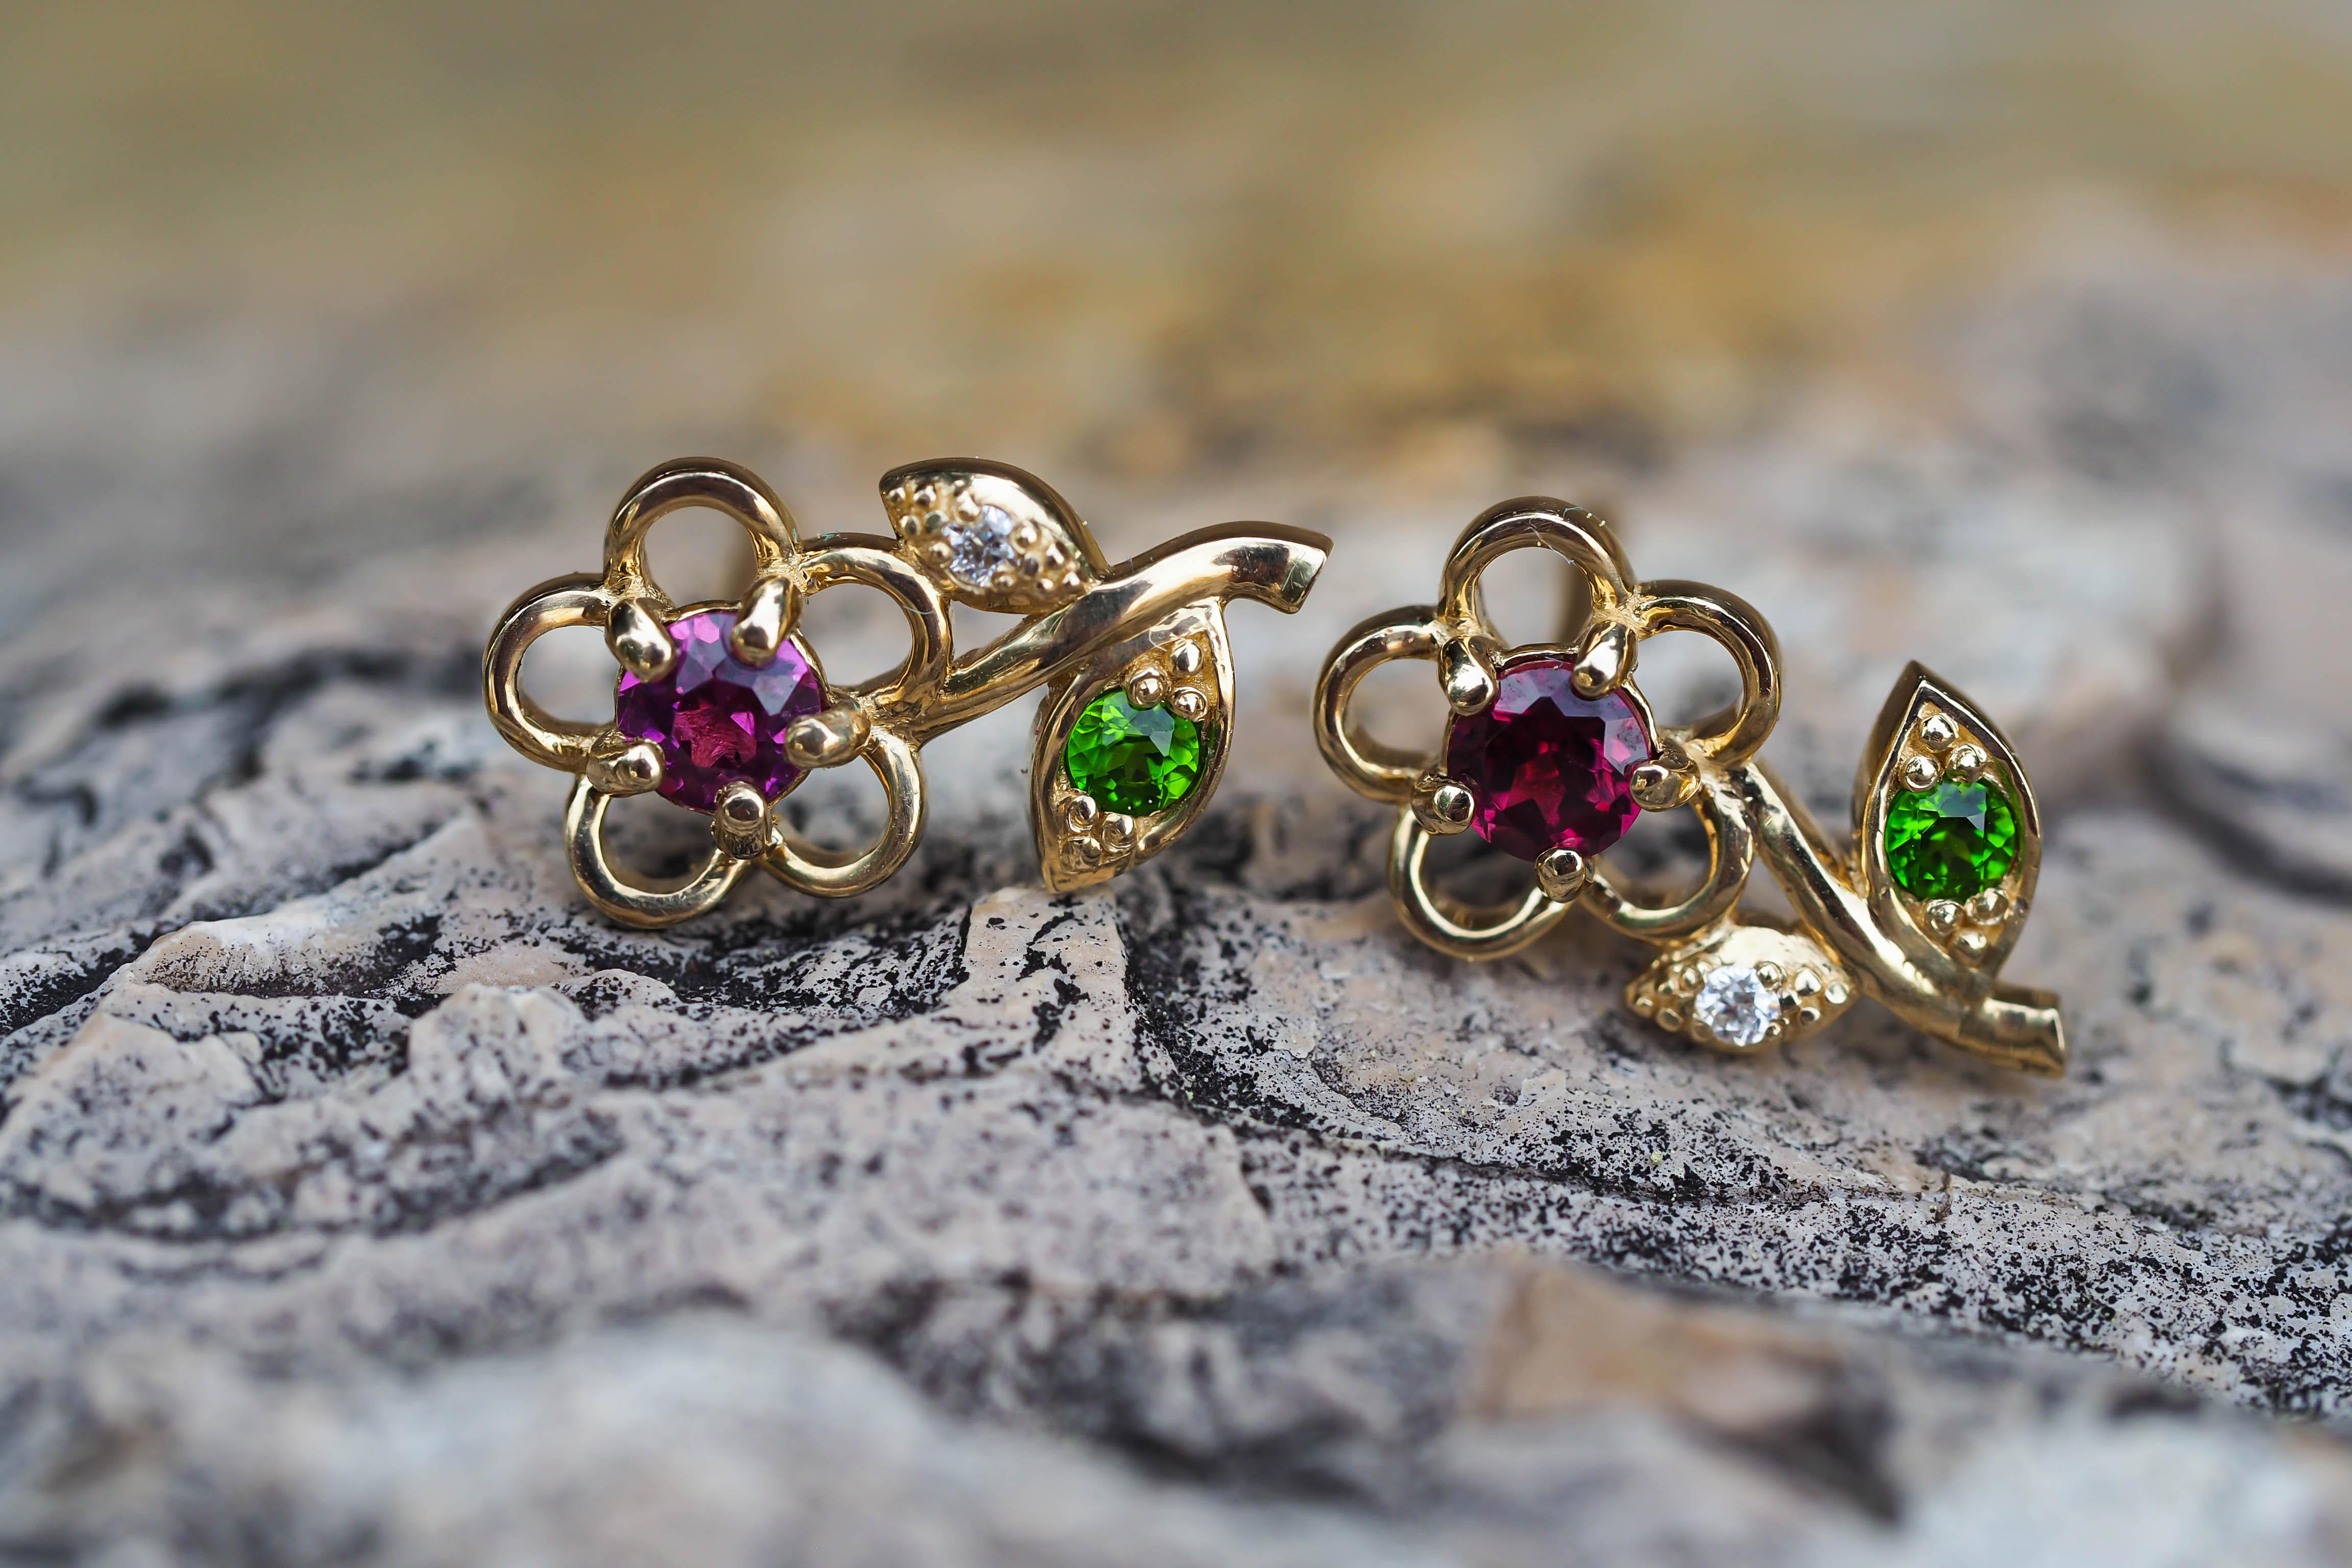 14k gold earrings studs with garnets, tsavorites and diamonds. Flower design studs with multicolor gemstones

metal: 14k gold 
weight: 1.95 gr
size: 13x6mm
set with garnets: red and purple color, round cut, clarity good - small inclusions,